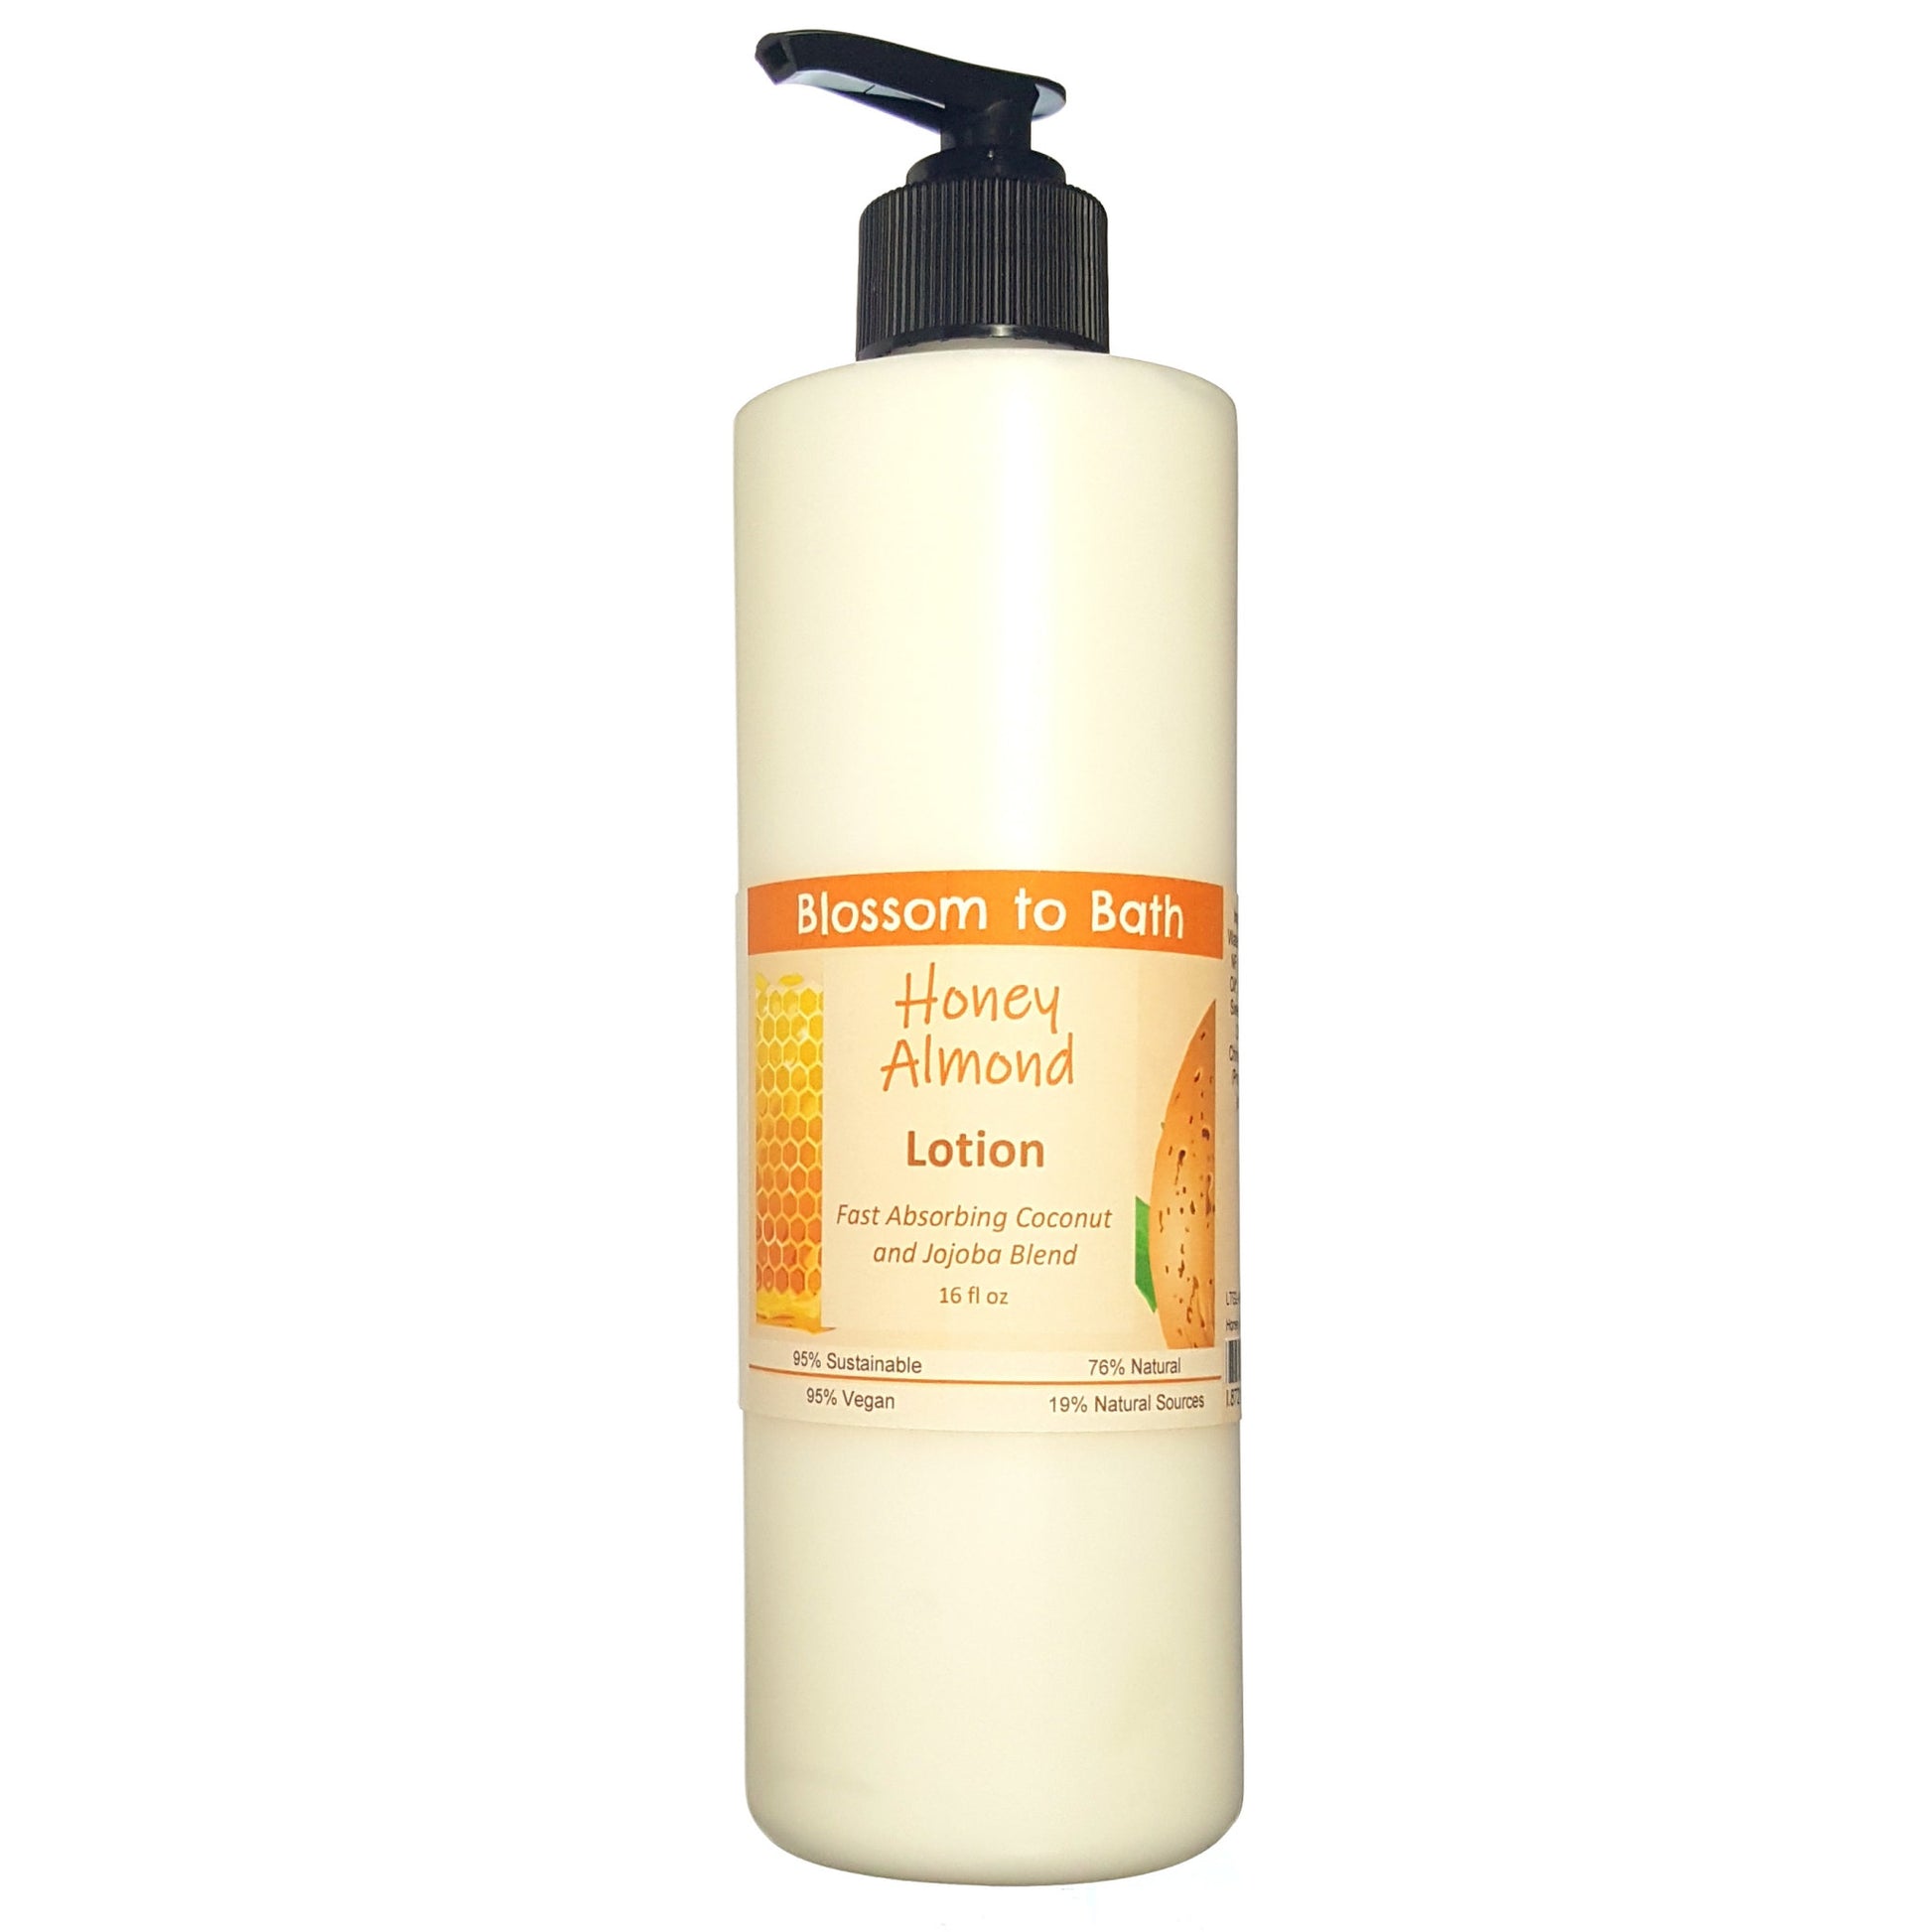 Buy Blossom to Bath Honey Almond Lotion from Flowersong Soap Studio.  Daily moisture luxury that soaks in quickly made with organic oils and butters that soften and smooth the skin  Sweetly fragrant nutty almond drizzled with honey.